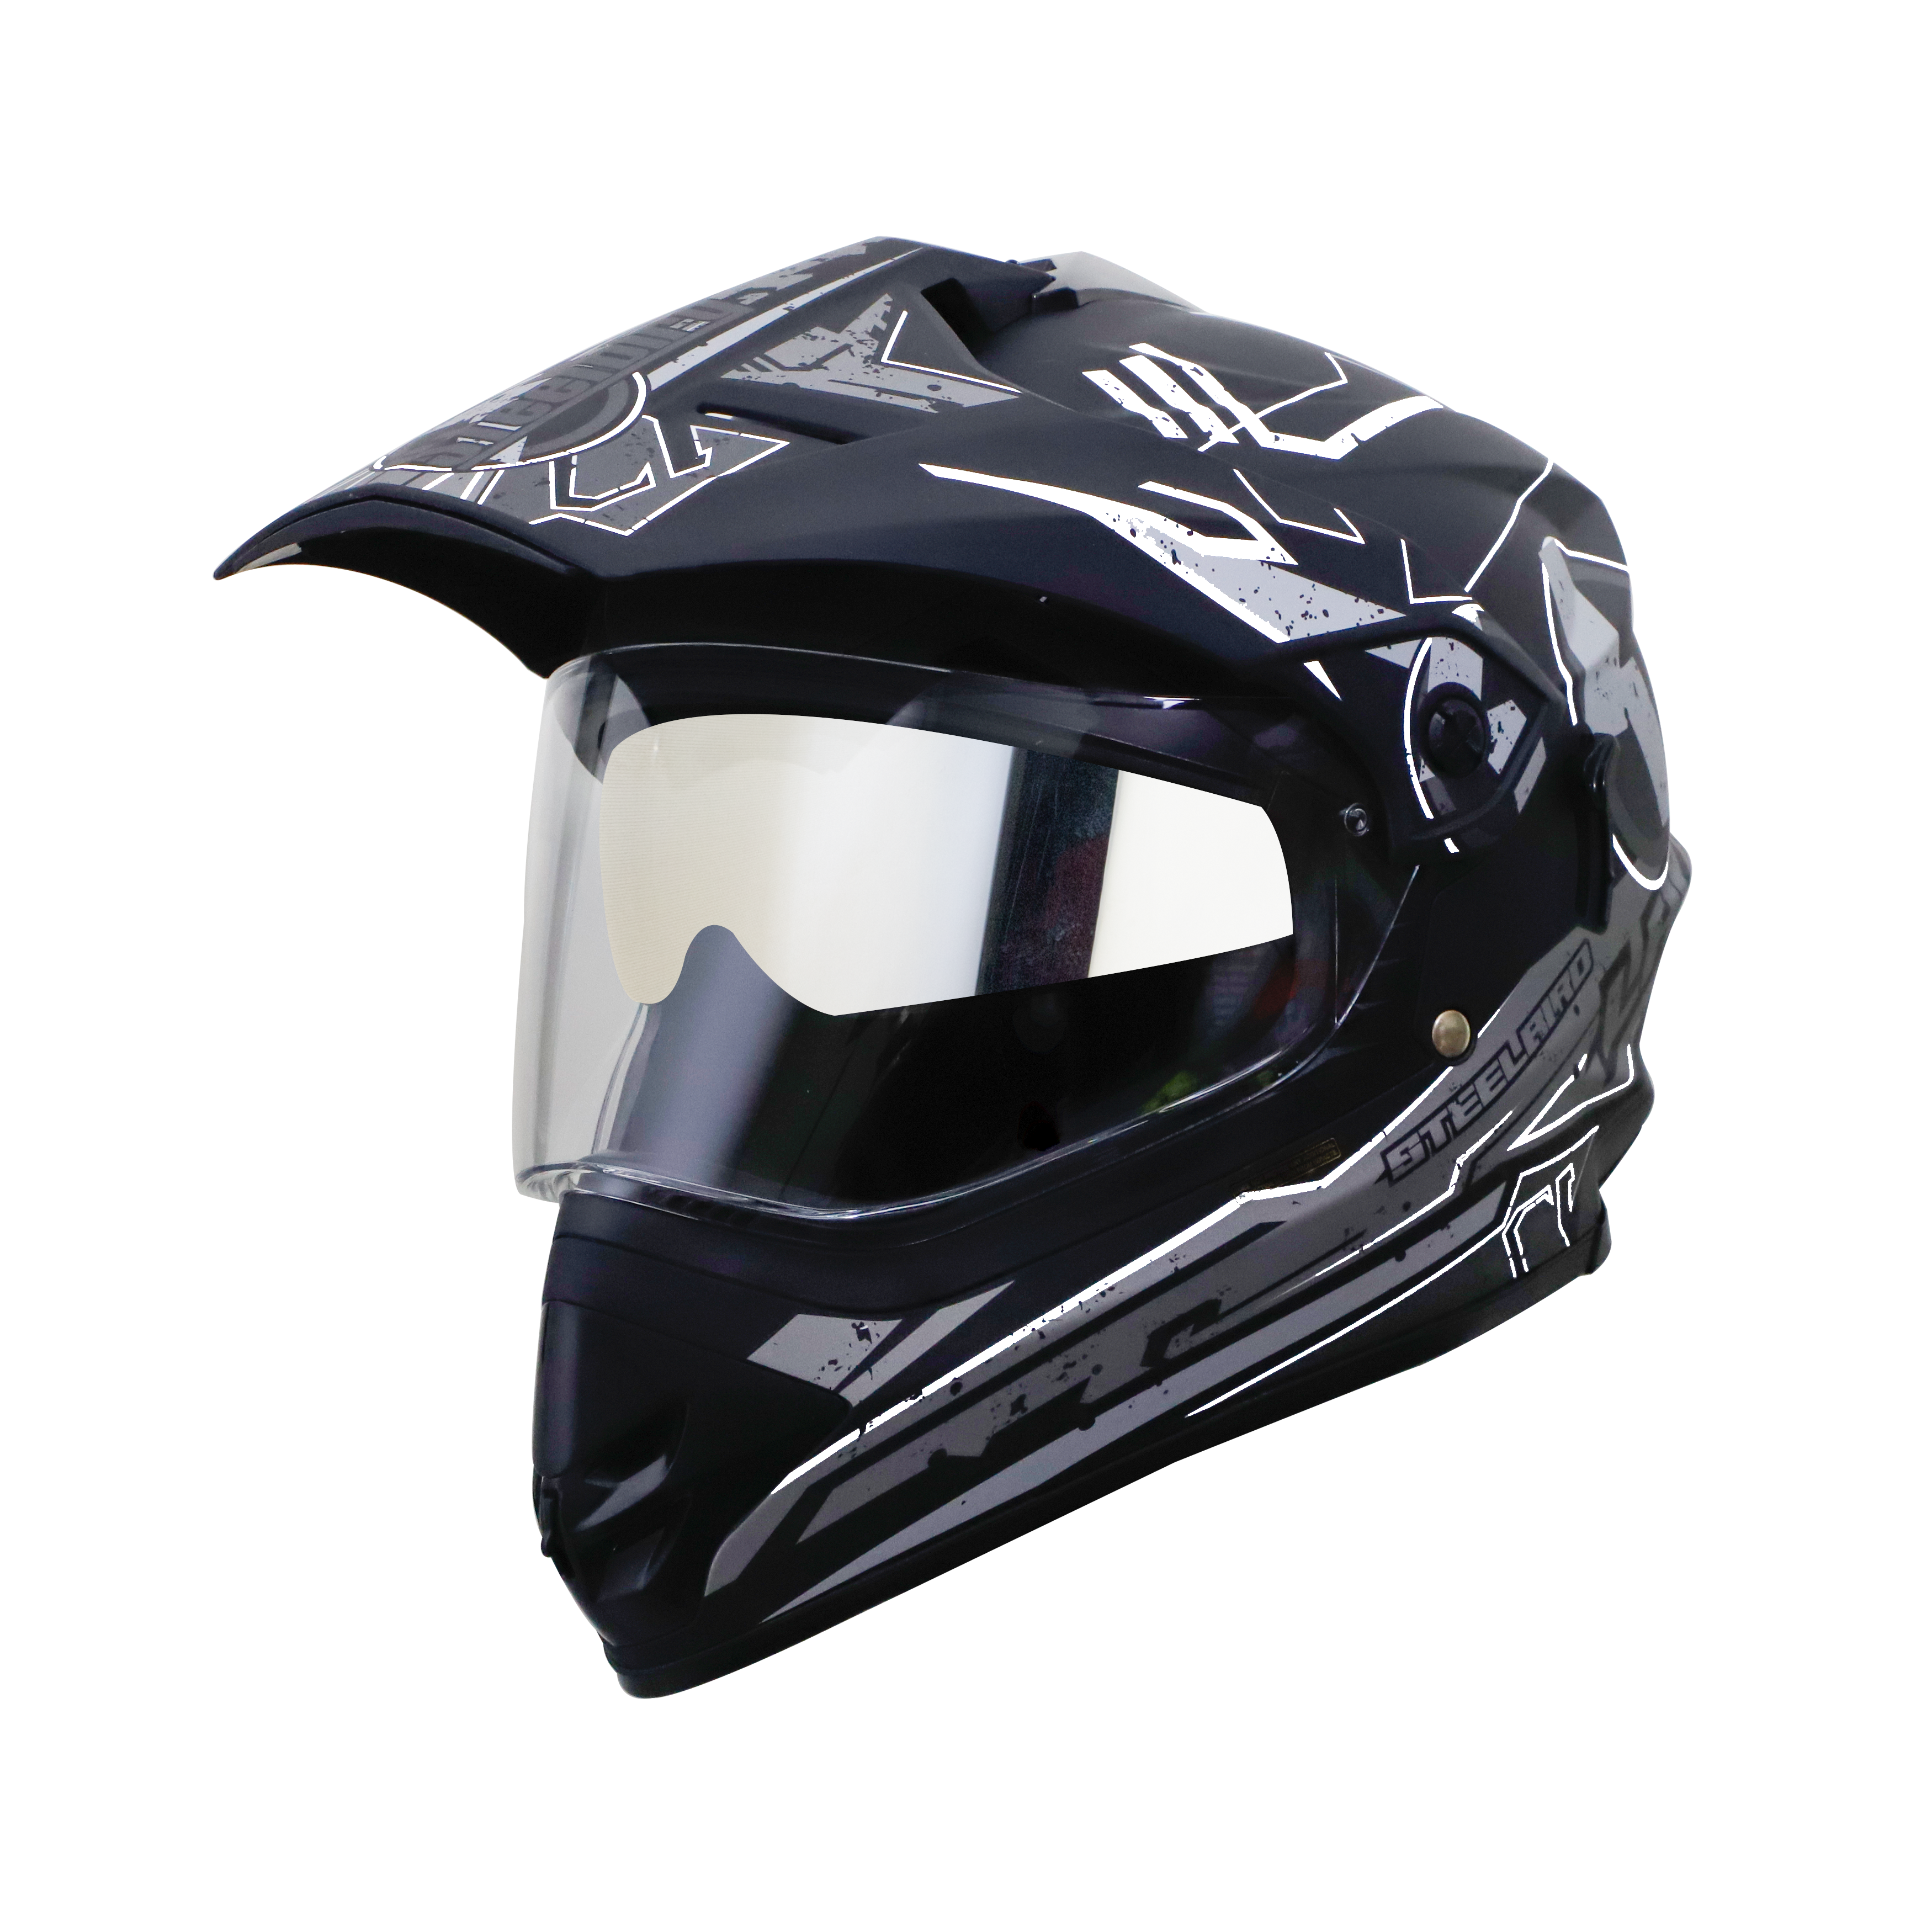 SB-42 BANG LAP GLOSSY BLACK WITH WHITE (WITH CHROME SILVER INNER SUN SHIELD)